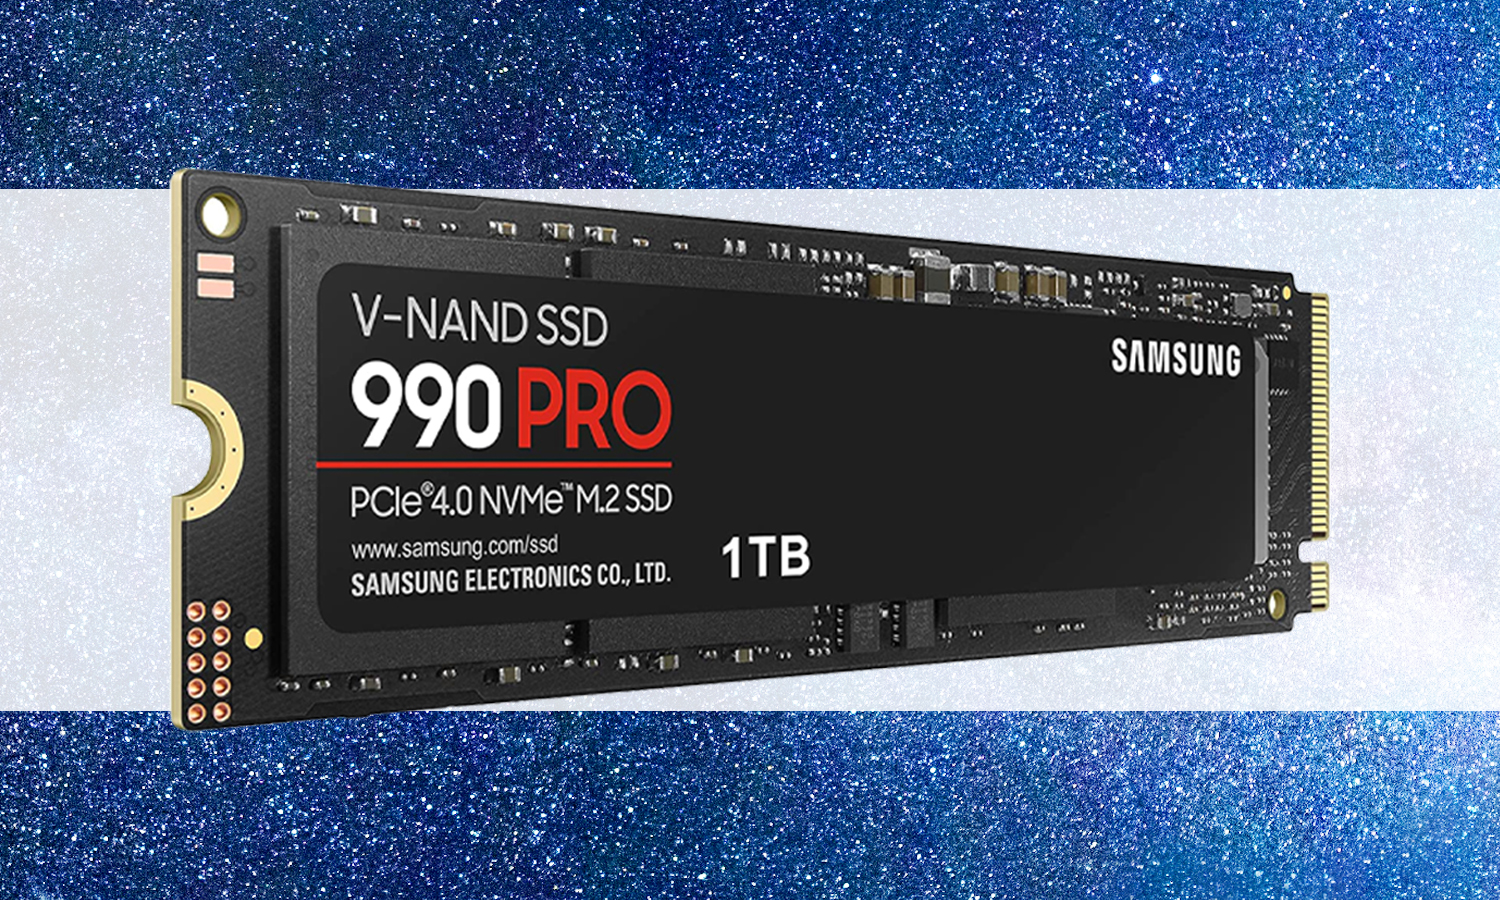 SSD Interne Samsung 990 Pro compatible PS5